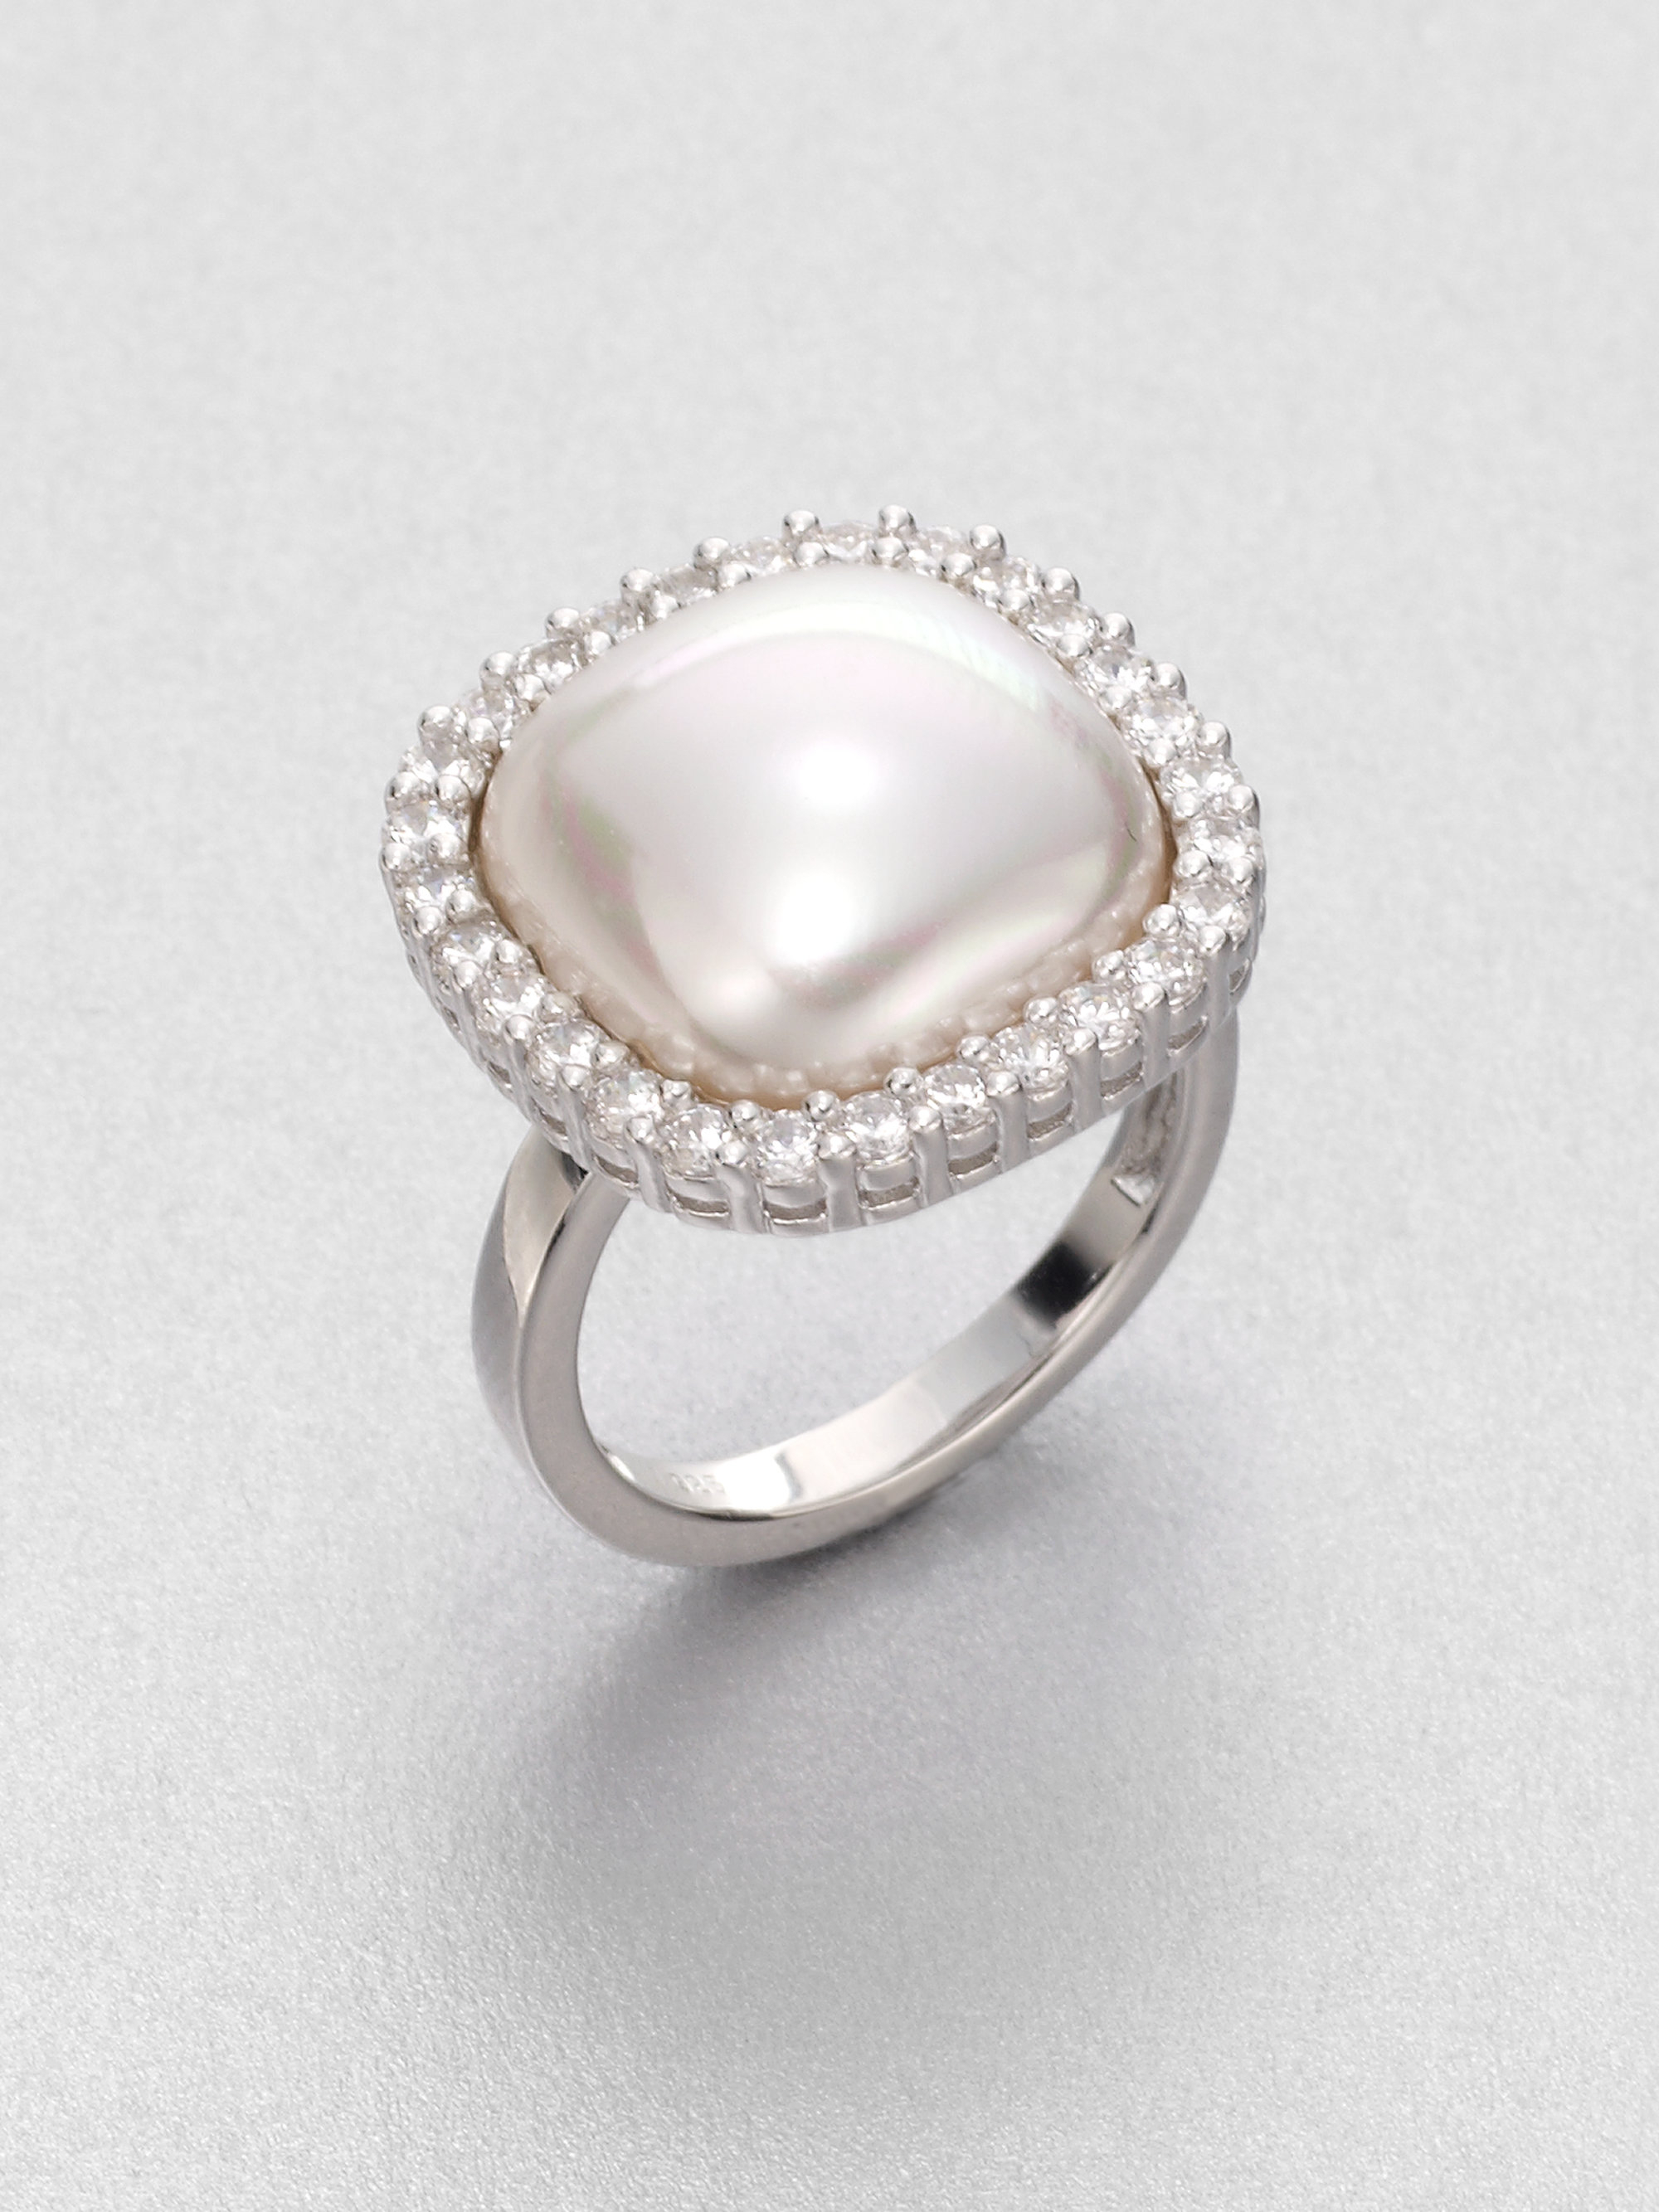 Stunning White MABE Pearl 925 Sterling Silver SZ 6 Ring YE-2569 